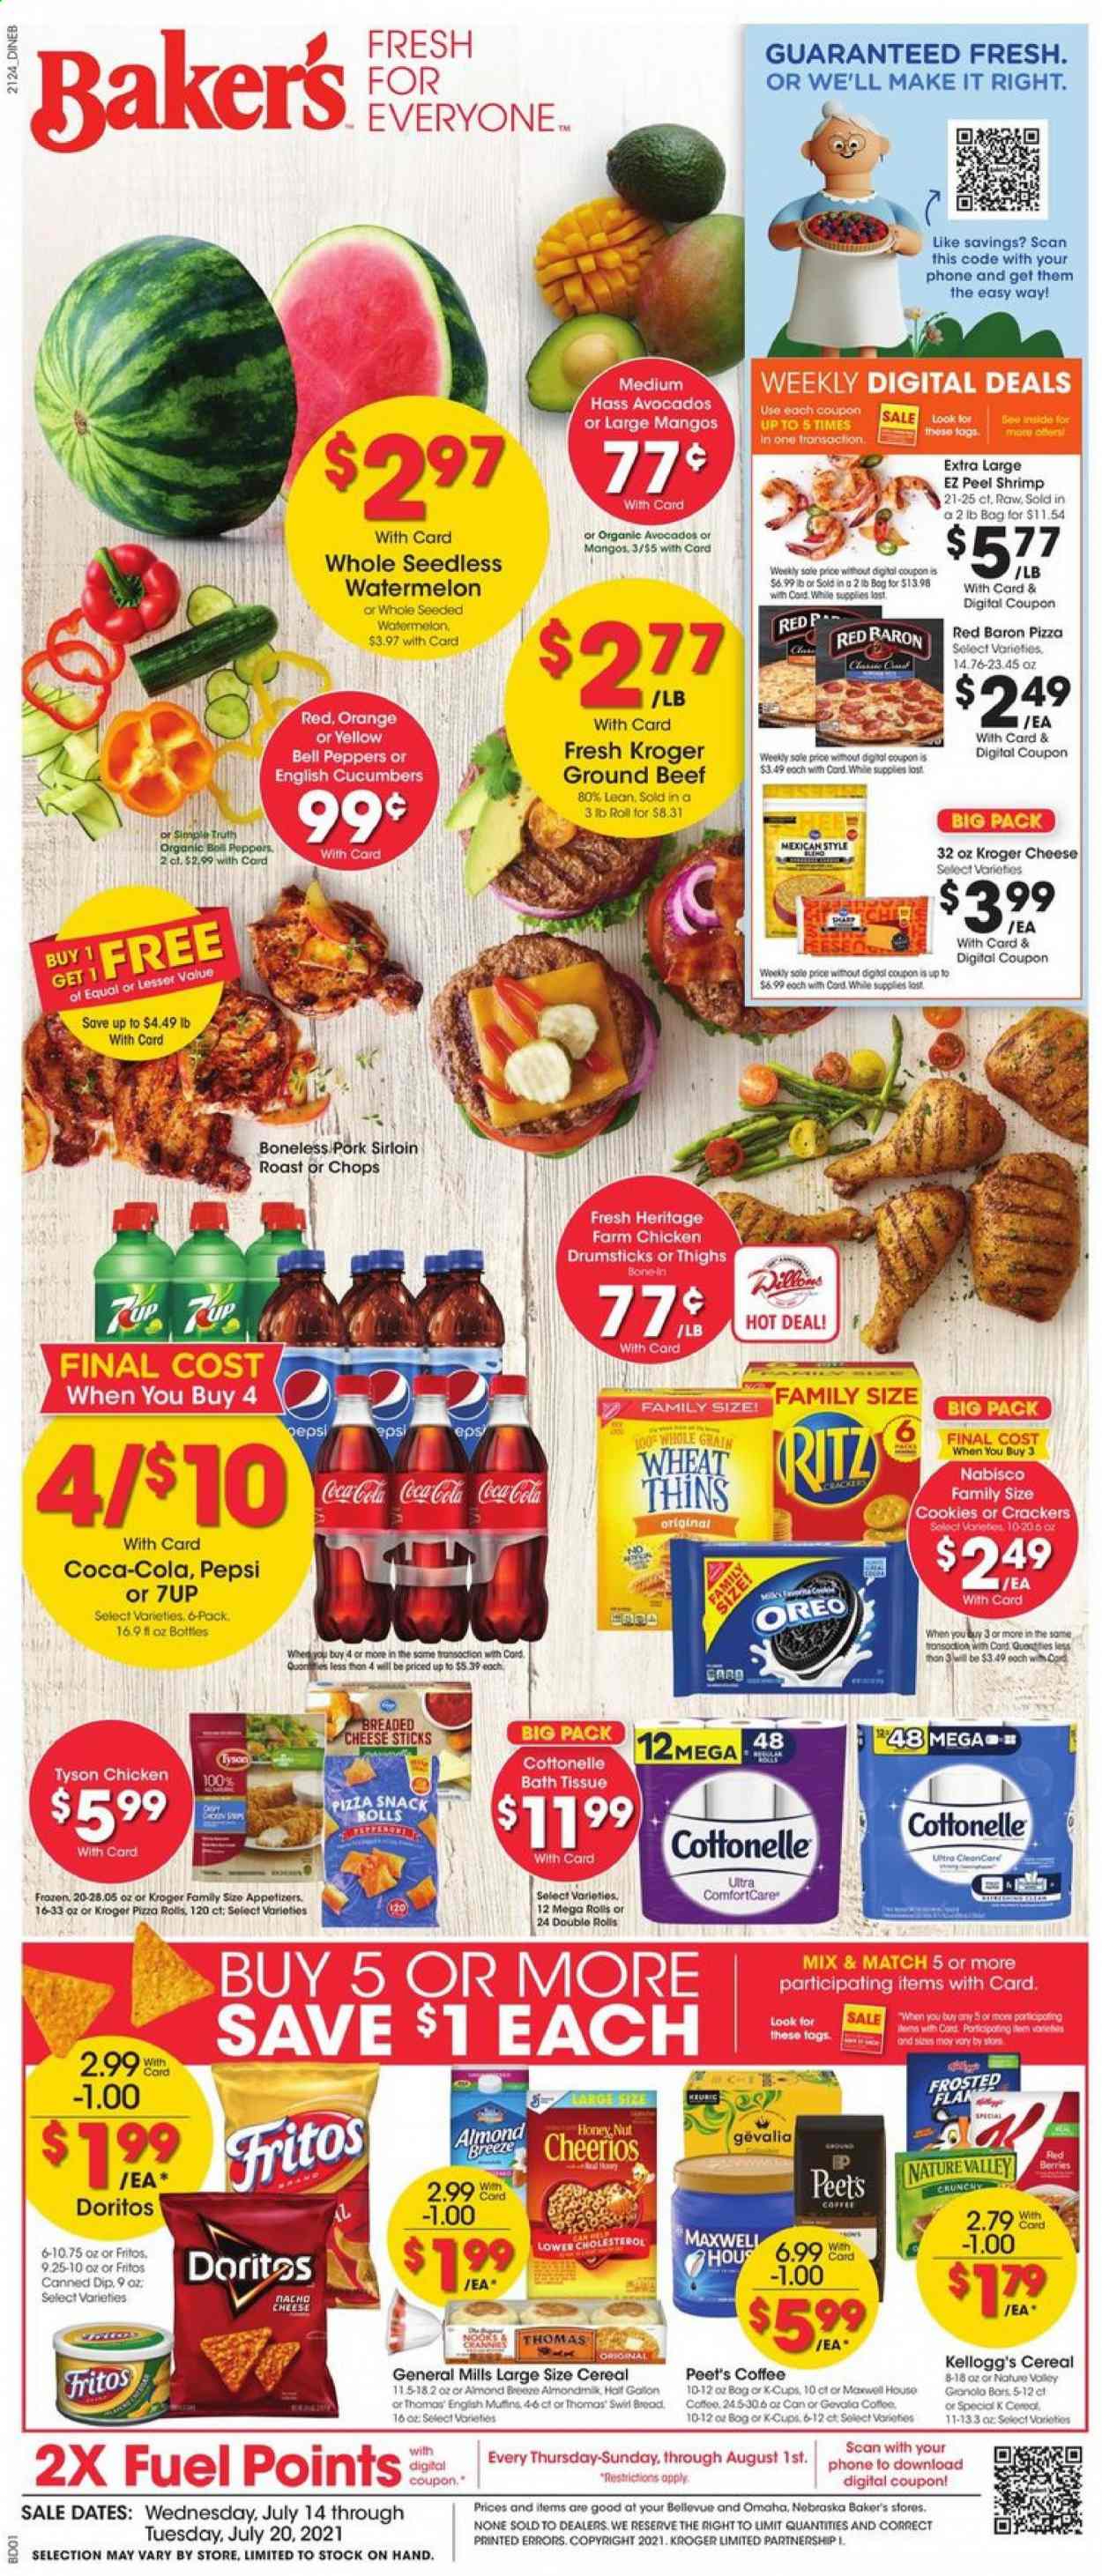 thumbnail - Baker's Flyer - 07/14/2021 - 07/20/2021 - Sales products - english muffins, pizza rolls, bell peppers, cucumber, peppers, avocado, mango, watermelon, oranges, shrimps, pizza, Oreo, Almond Breeze, dip, cheese sticks, Red Baron, cookies, snack, crackers, Kellogg's, RITZ, Doritos, Fritos, Thins, cereals, Cheerios, Nature Valley, Coca-Cola, Pepsi, 7UP, coffee, coffee capsules, K-Cups, Gevalia, chicken drumsticks, beef meat, ground beef, pork loin, bath tissue, Cottonelle, gallon. Page 1.